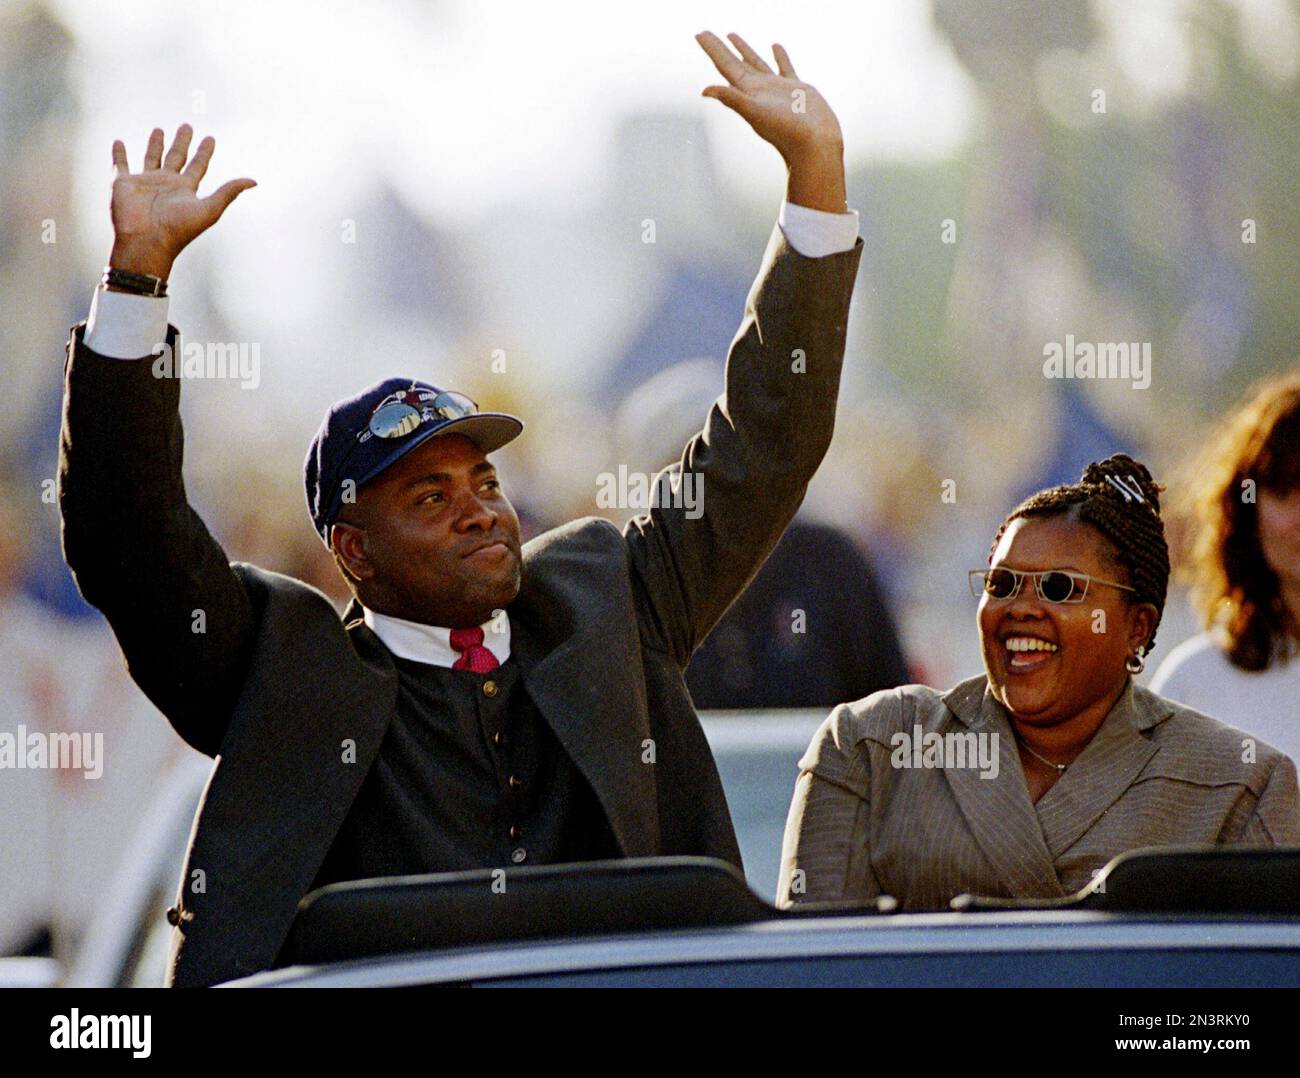 San Diego Padres great Tony Gwynn waves to the crowd as his wife, high  school sweetheart Alicia Gwynn looks on during the Padres' post World  Series parade in downtown San Diego in